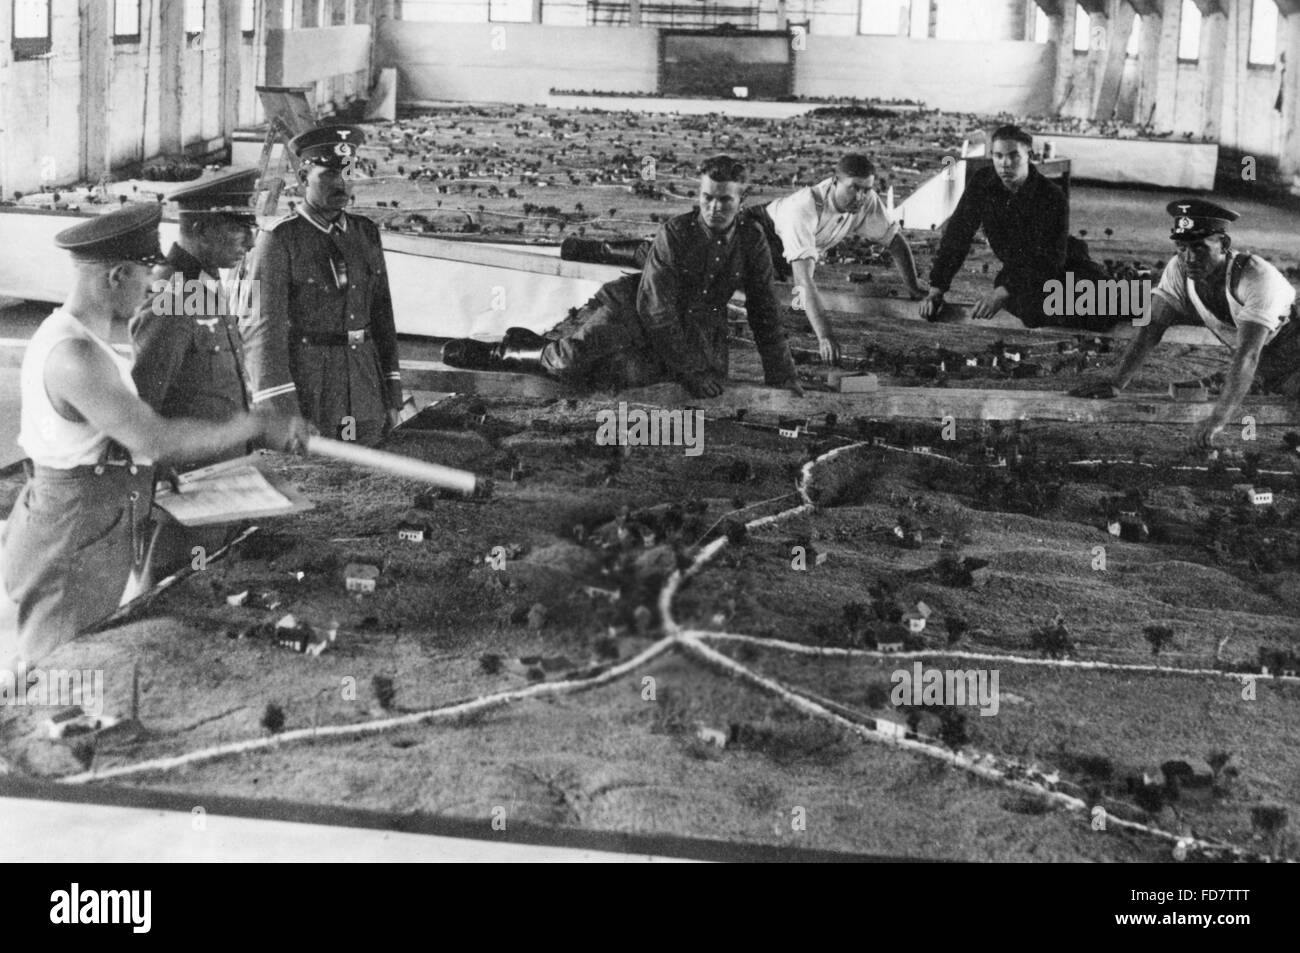 Reichswehr soldiers build a giant model of a battle, 1934 Stock Photo